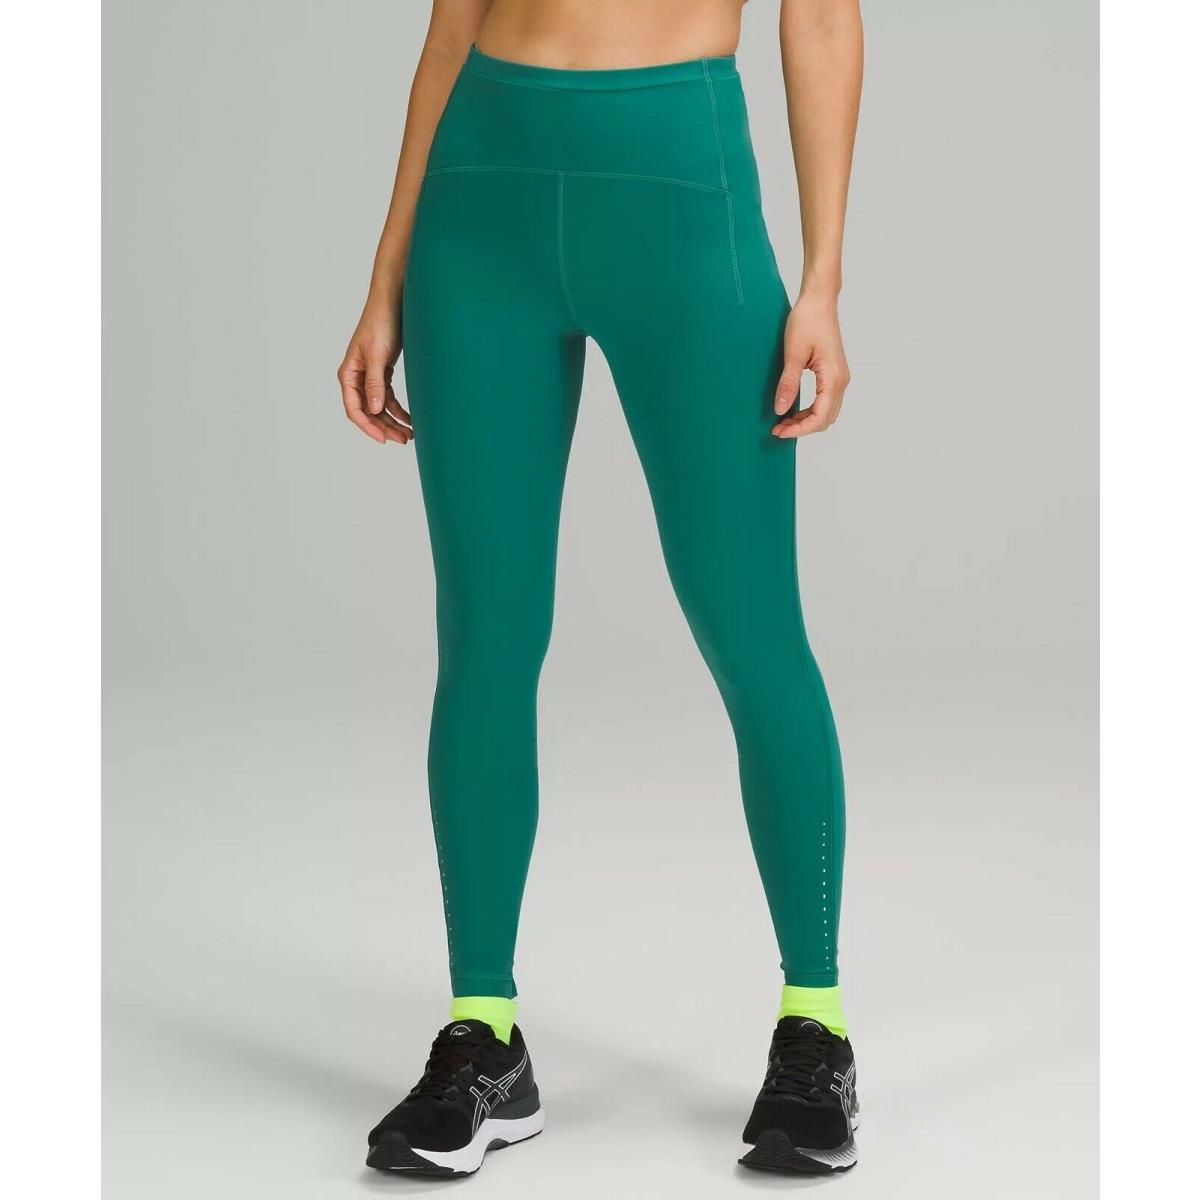 NWT$128 Lululemon Swift Speed High-rise Tight 28 Wild Berry Size 16 Teal Lagoon